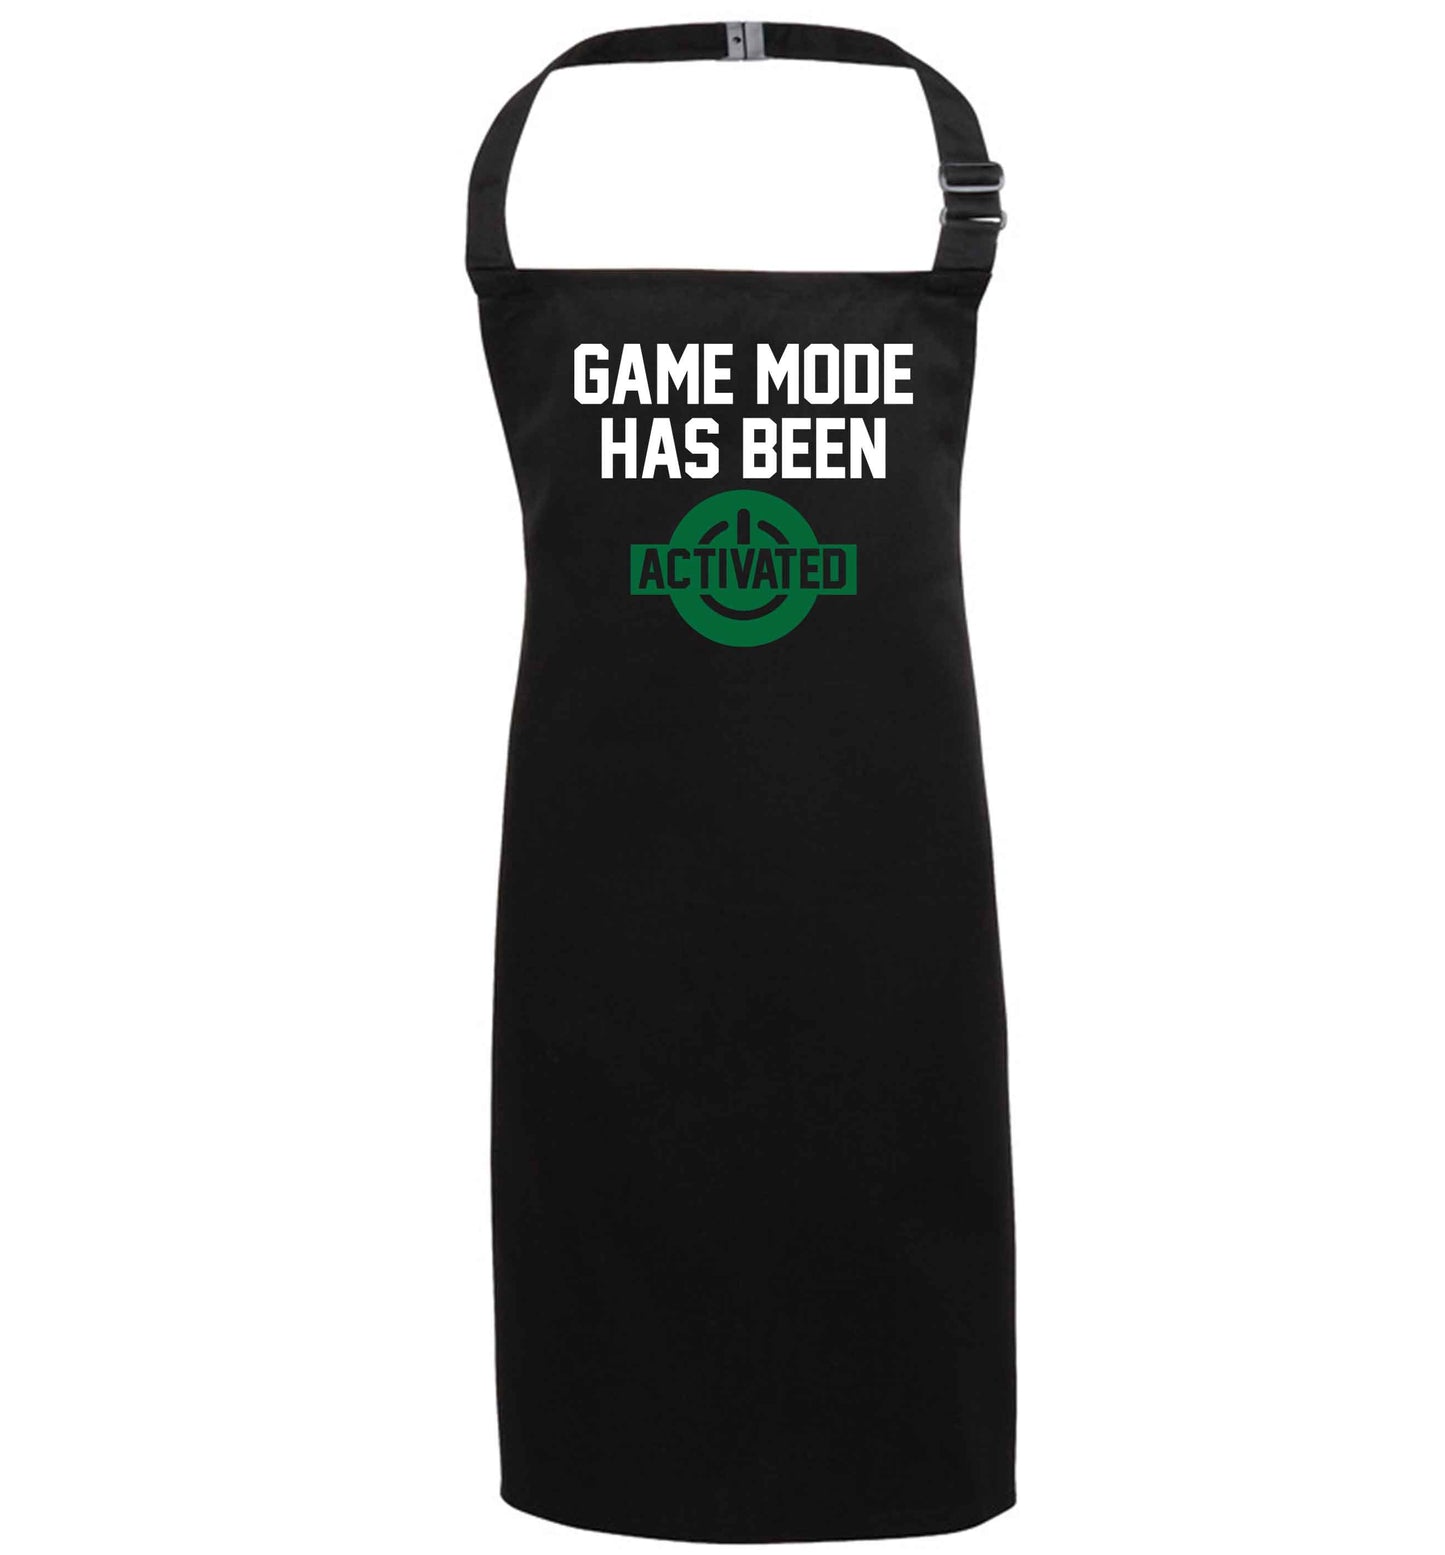 Game mode has been activated black apron 7-10 years